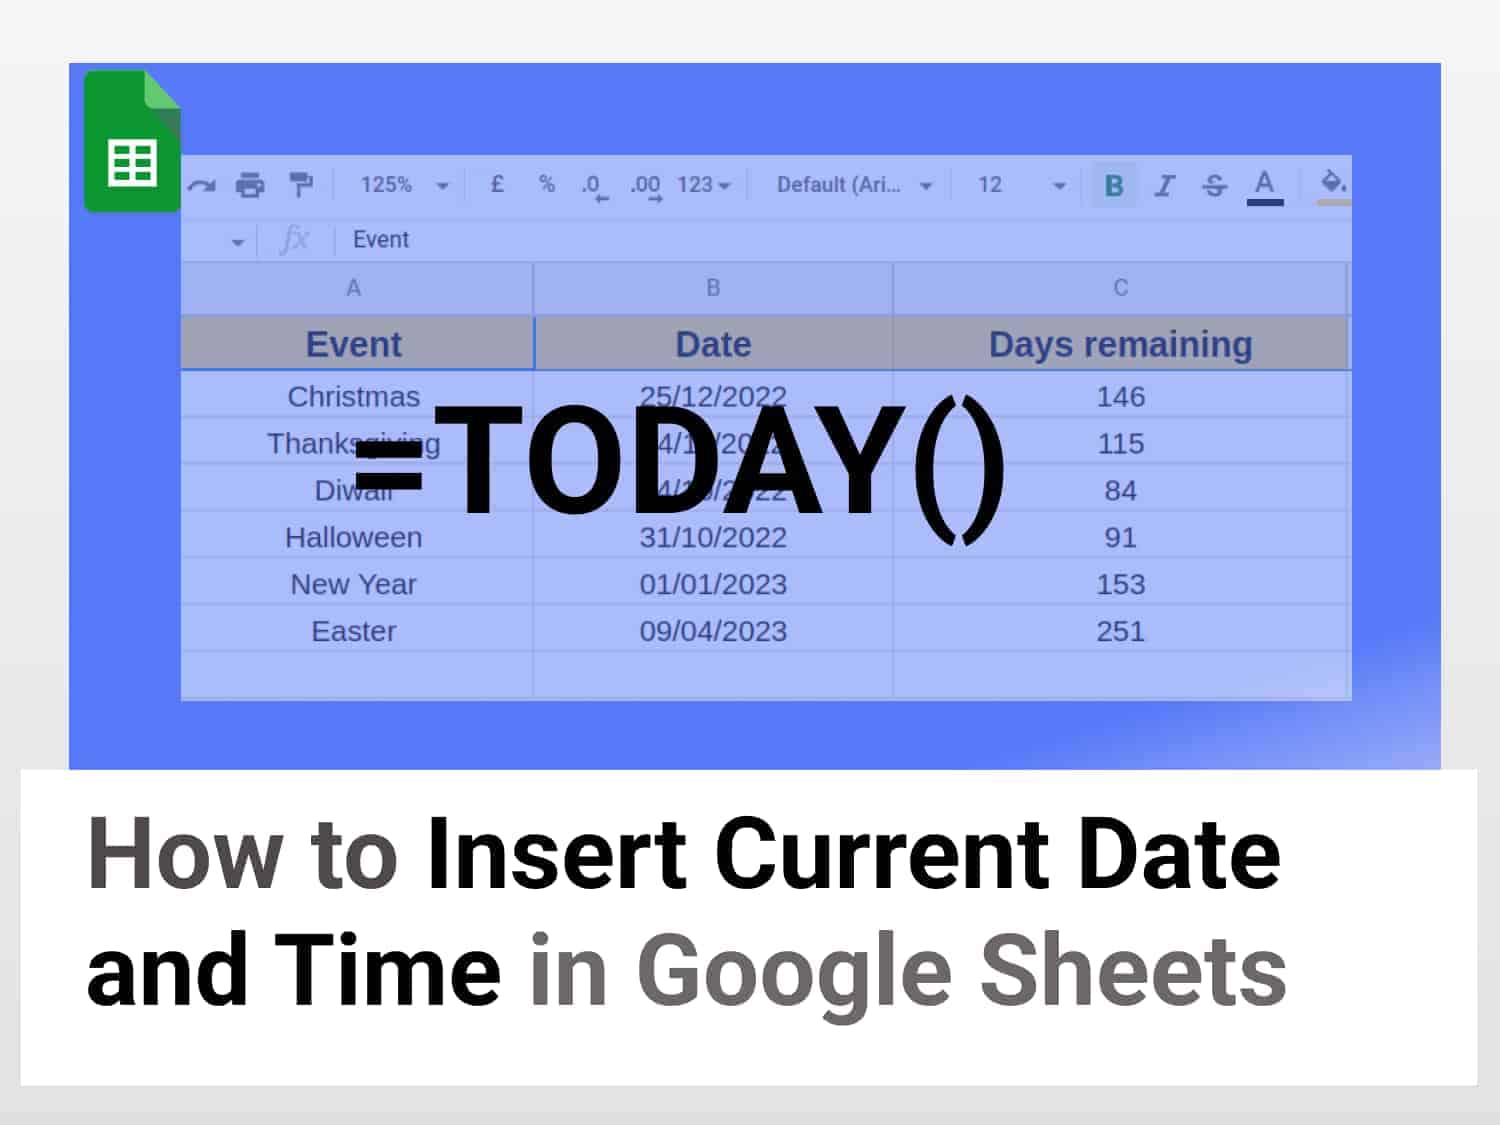 Inserting the current date and time in Google Sheets